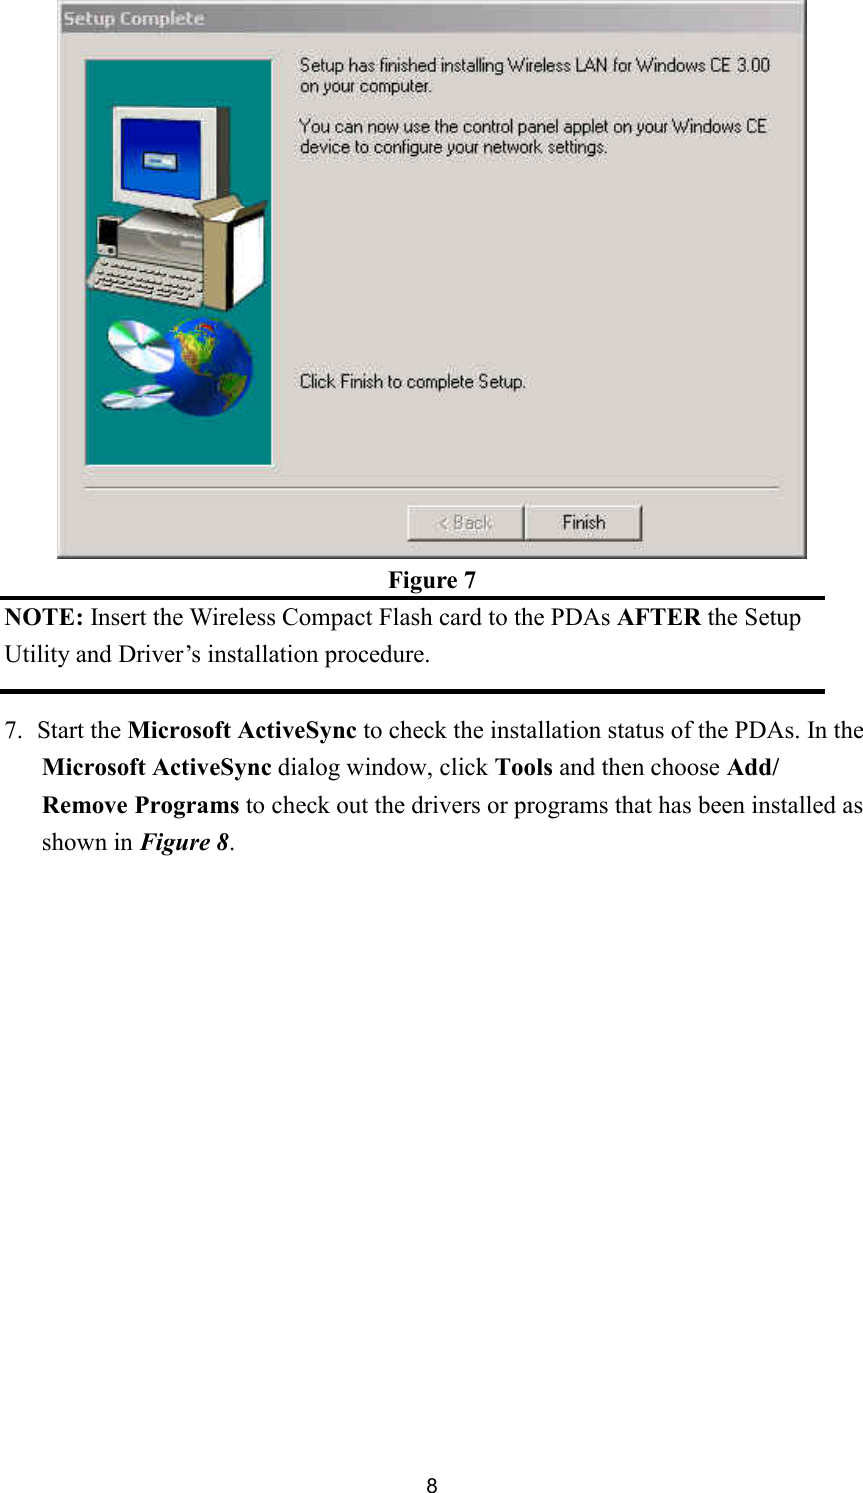  8 Figure 7 NOTE: Insert the Wireless Compact Flash card to the PDAs AFTER the Setup Utility and Driver’s installation procedure.  7. Start the Microsoft ActiveSync to check the installation status of the PDAs. In the Microsoft ActiveSync dialog window, click Tools and then choose Add/ Remove Programs to check out the drivers or programs that has been installed as shown in Figure 8. 